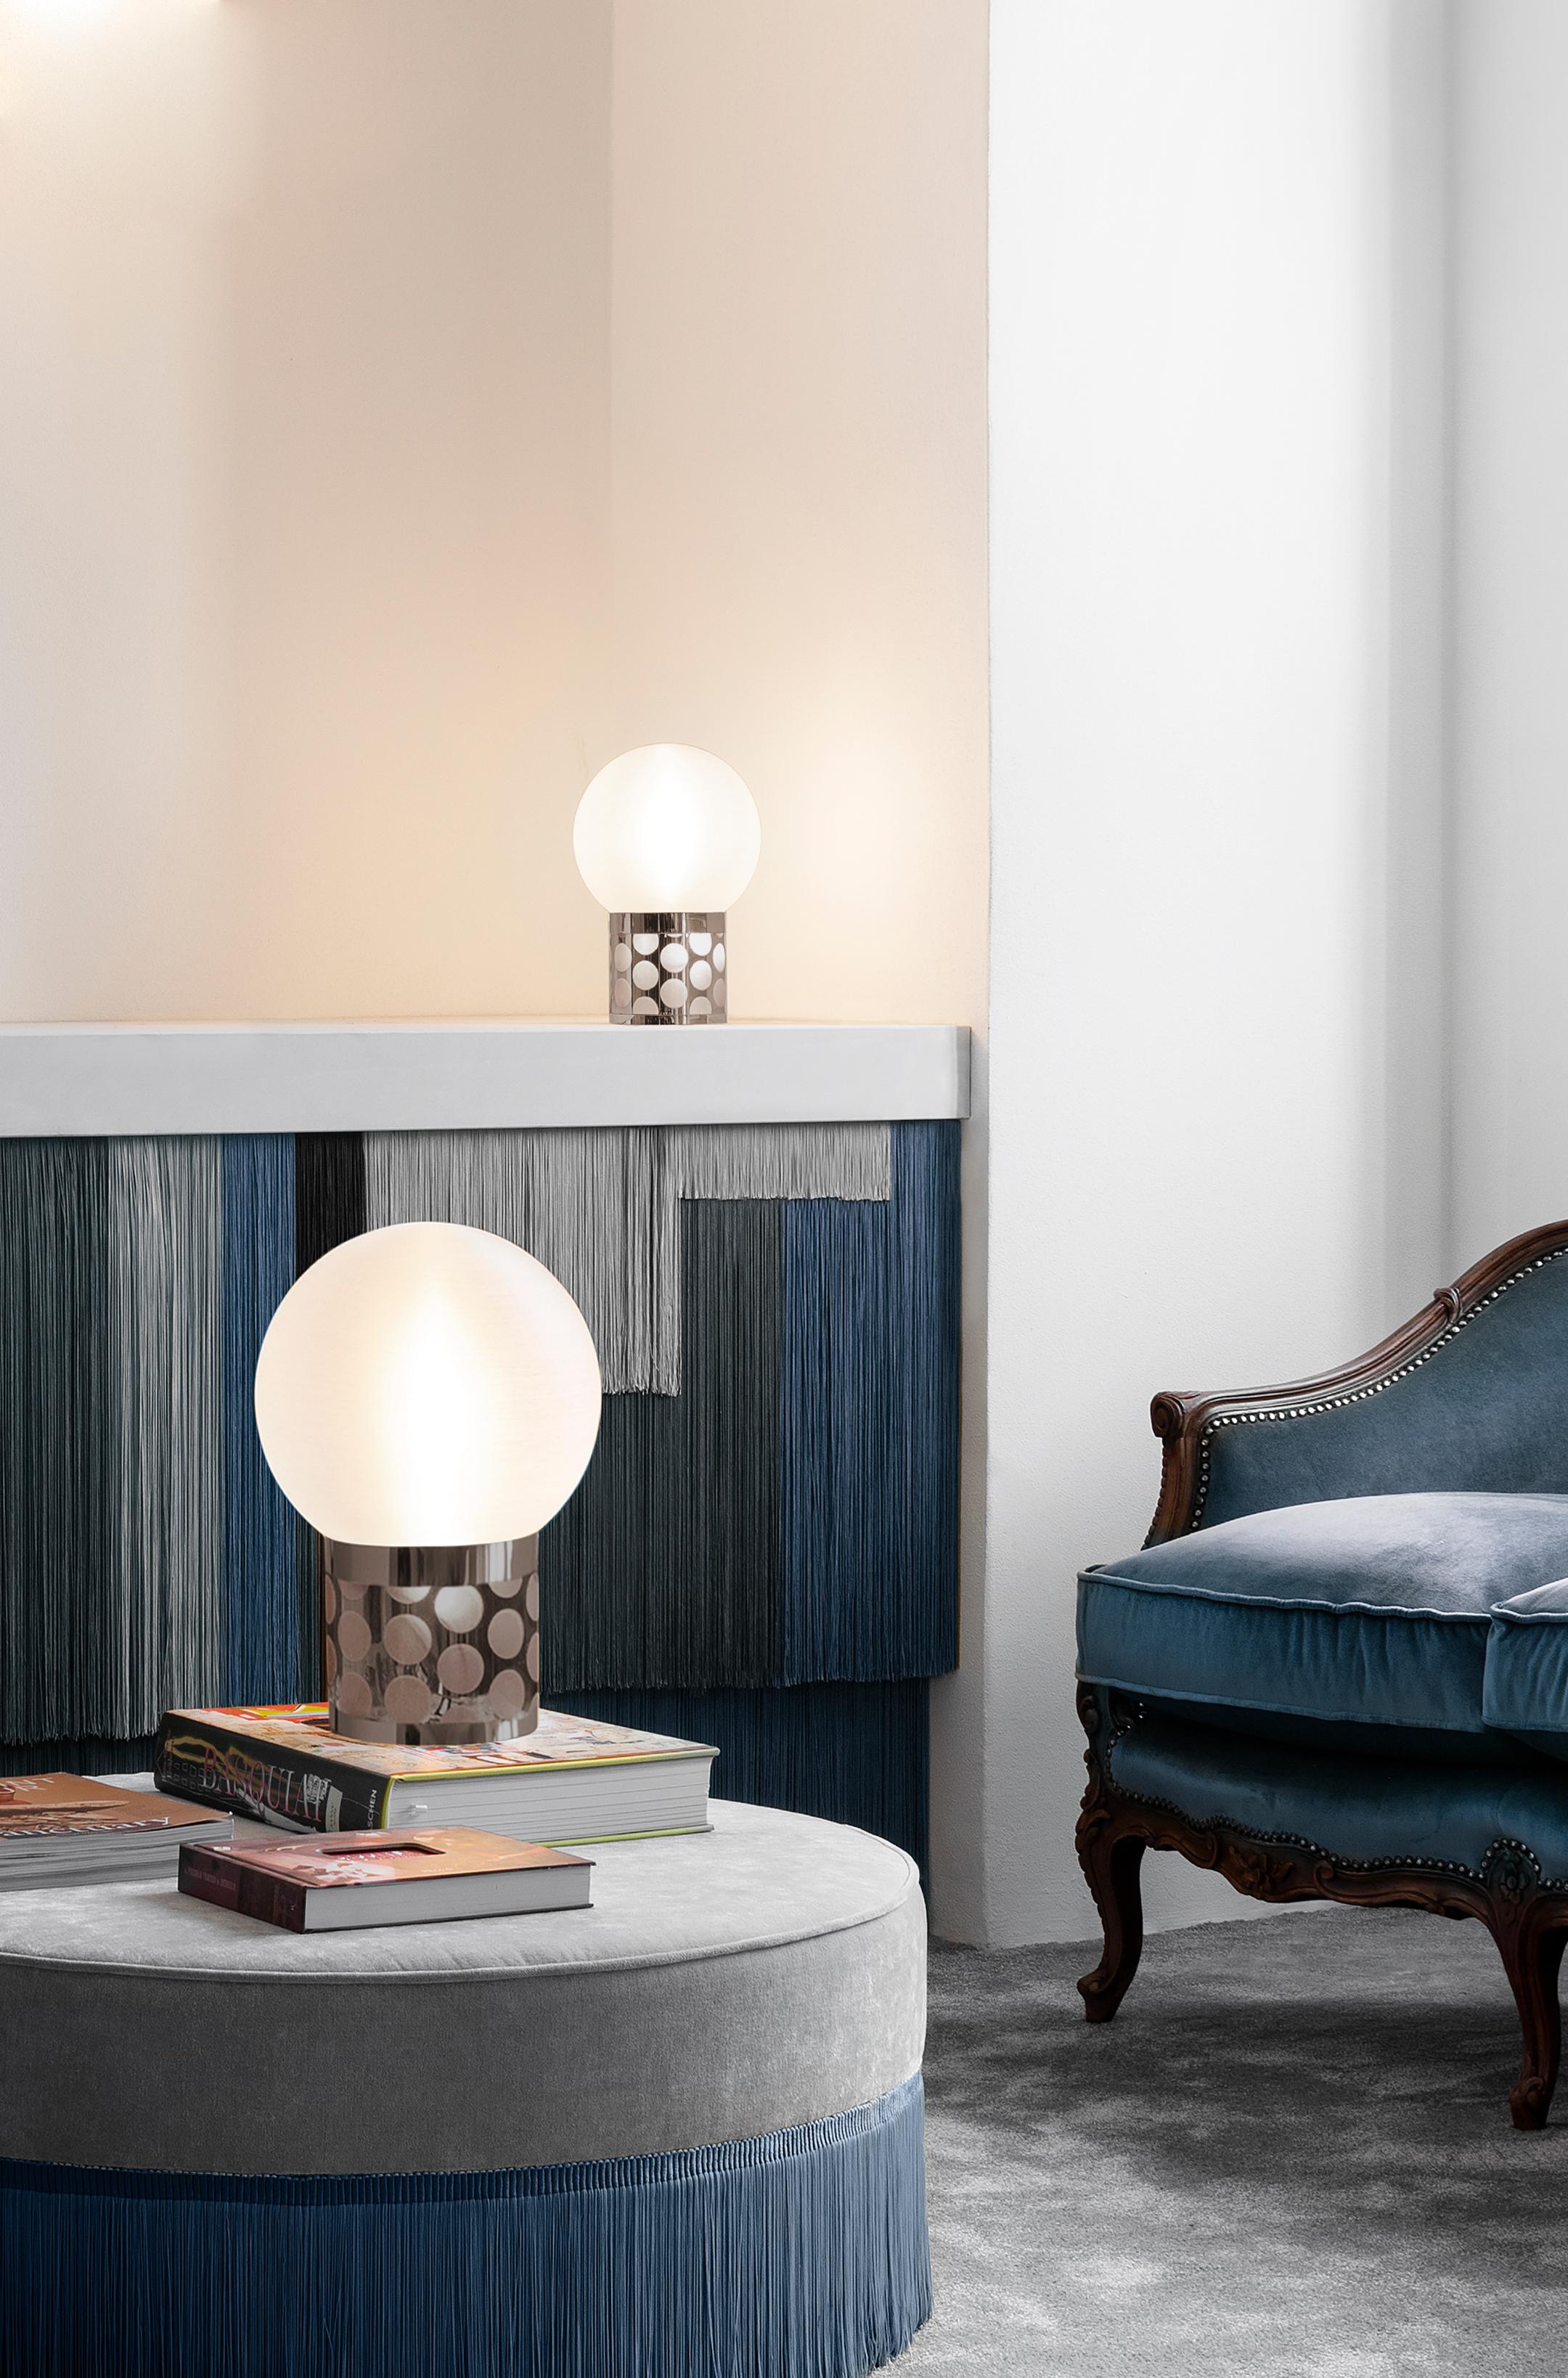 Atmosfera lies at the apex of fashion and design, where light melds into fabric. The new collection of table lamps are available in 2 sizes, and displays superimposed technopolymer layers create a polkadot effect. The lamps have independent switches